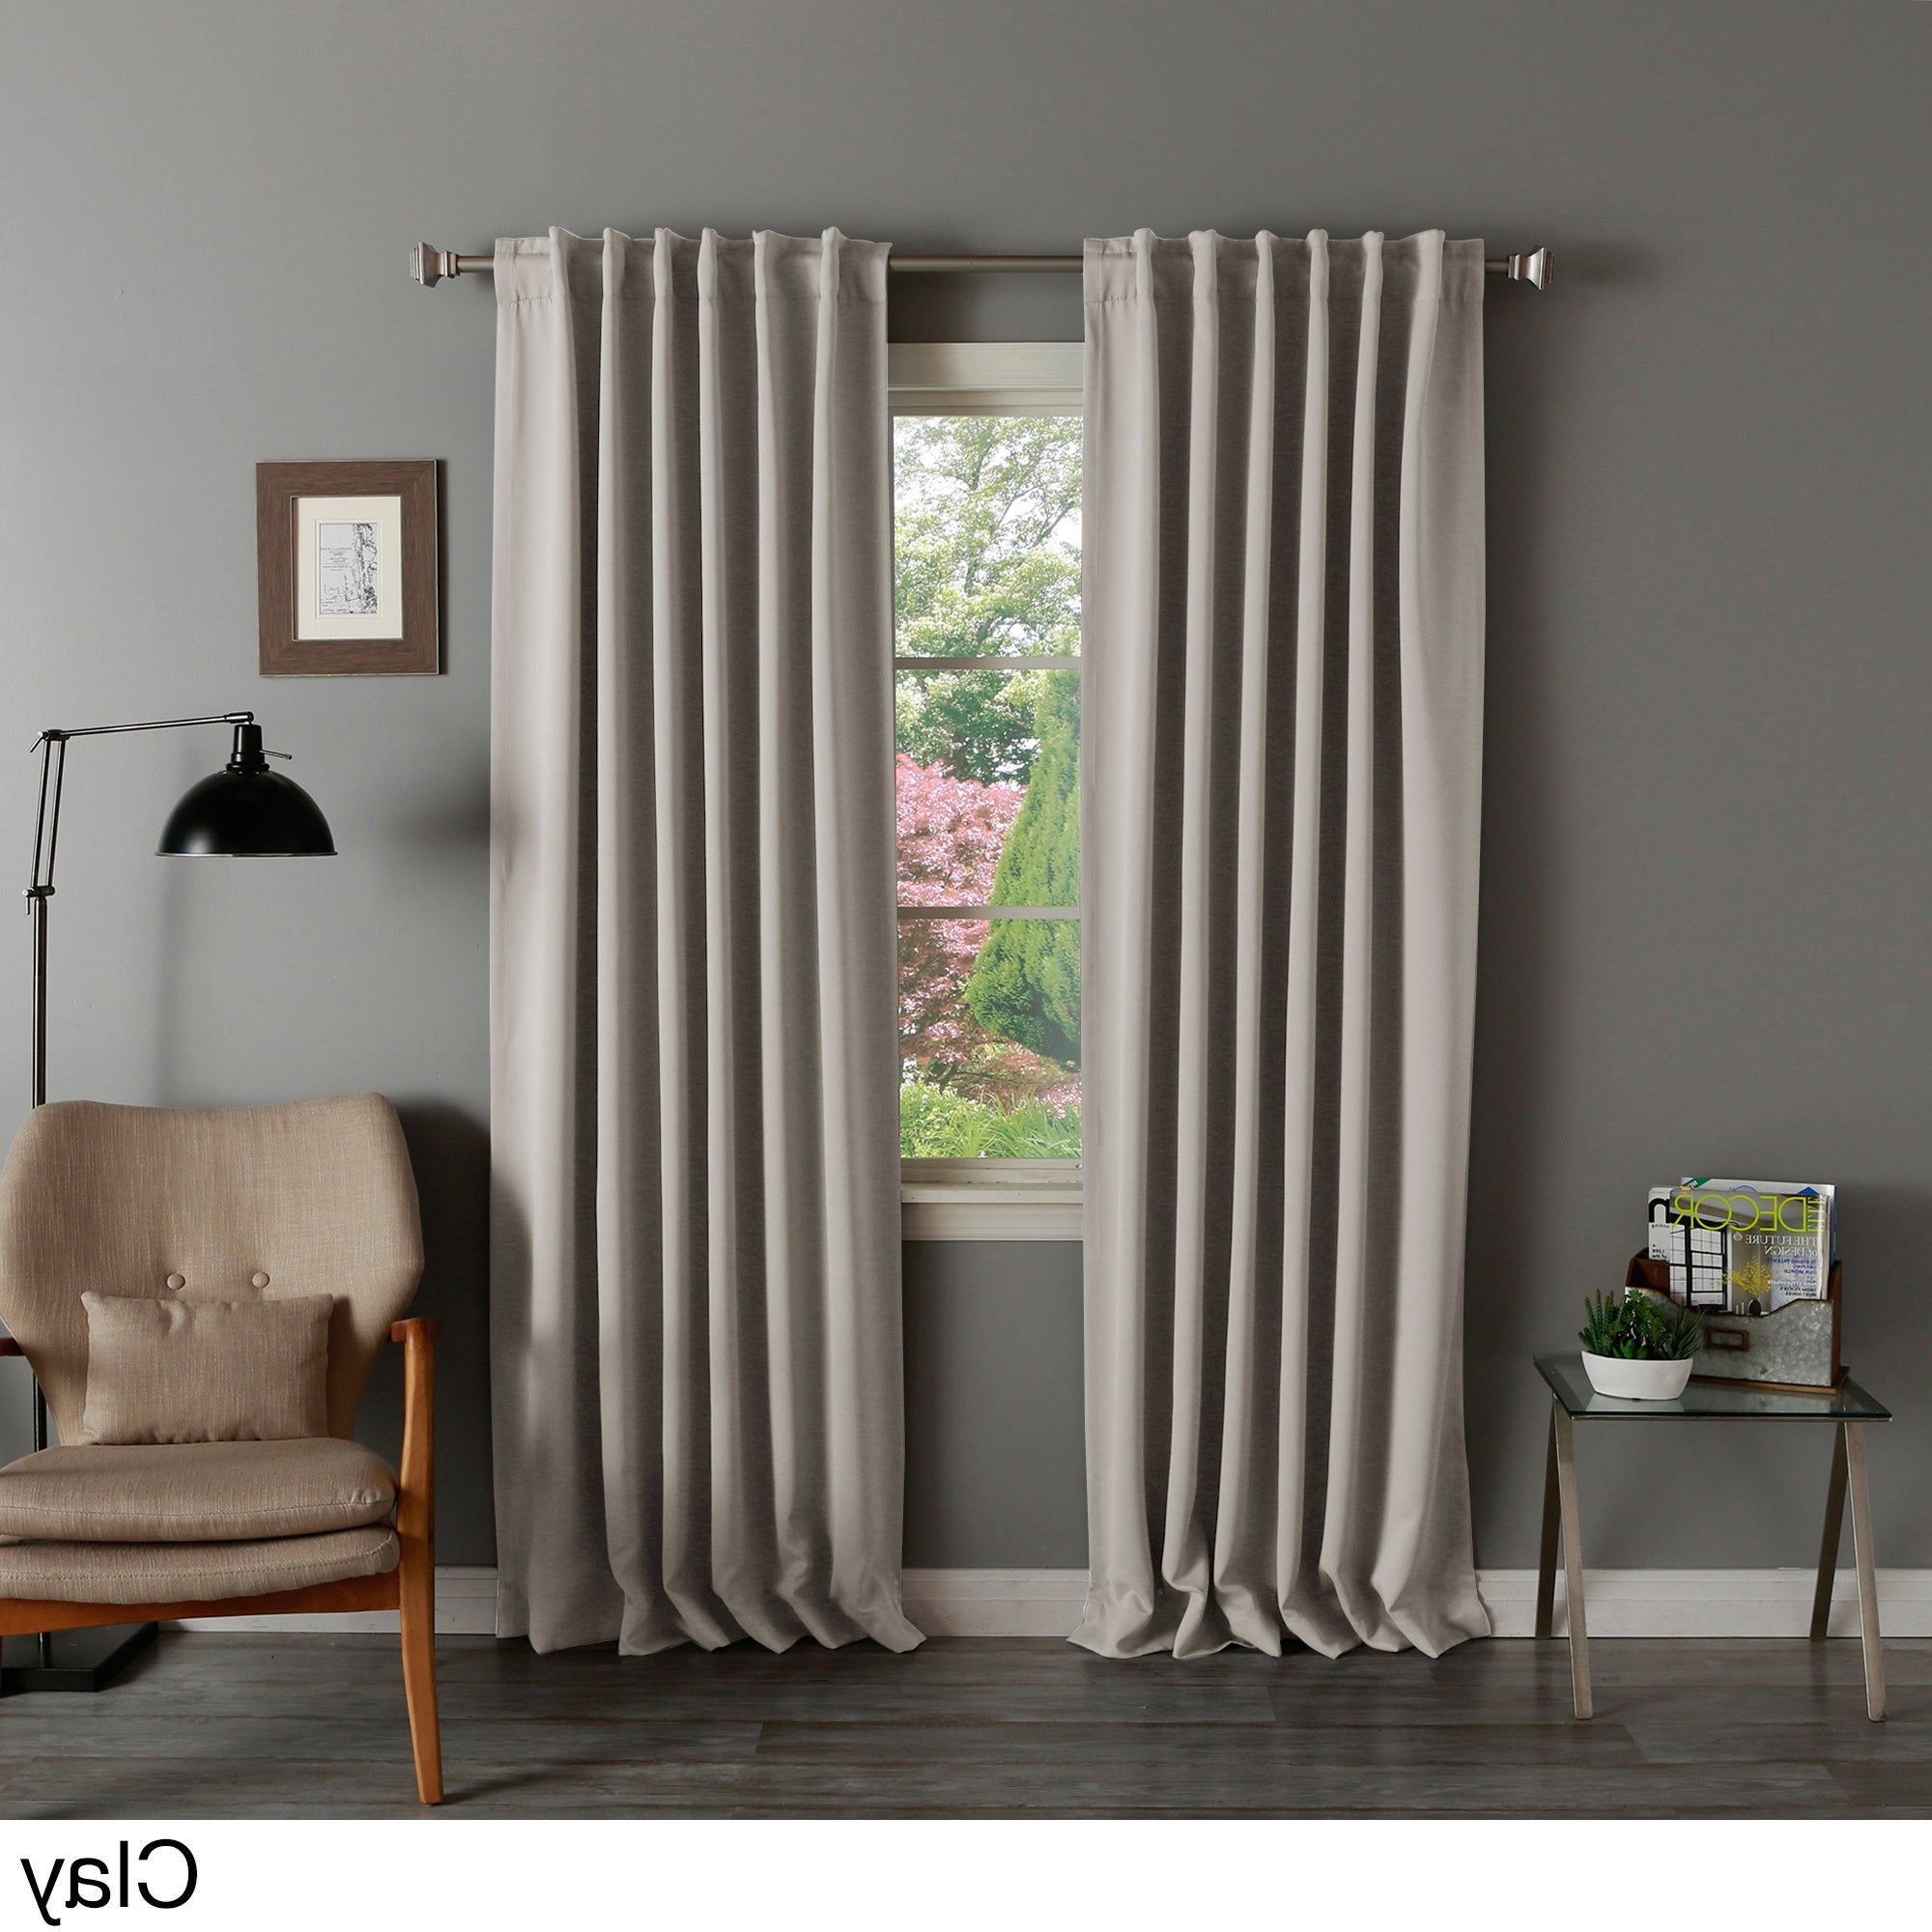 2020 Solid Insulated Thermal Blackout Curtain Panel Pair Inside Curtain Panel Pairs (View 1 of 20)